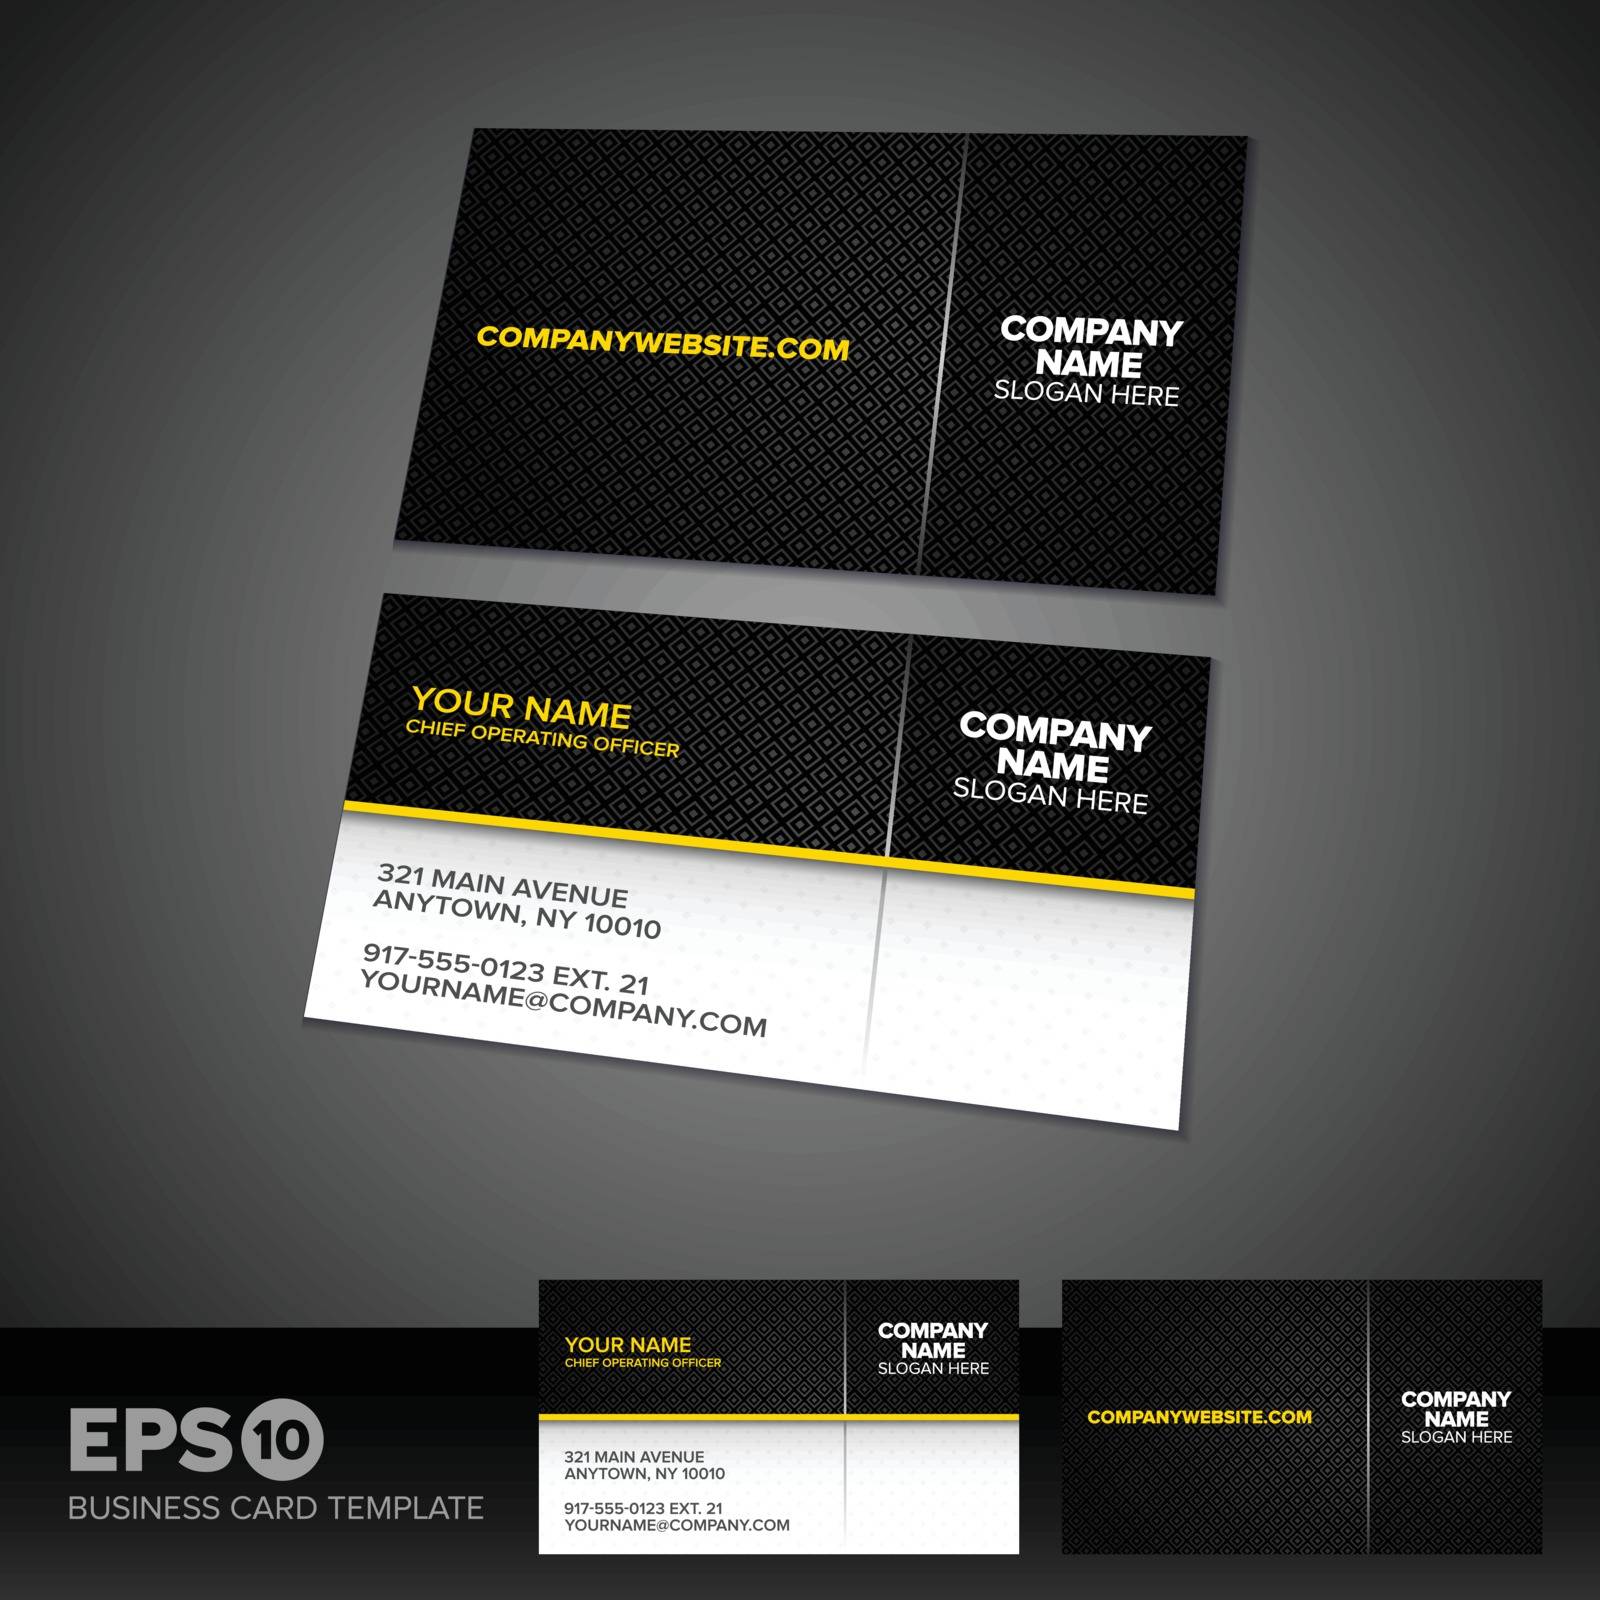 Business cards by kartyl